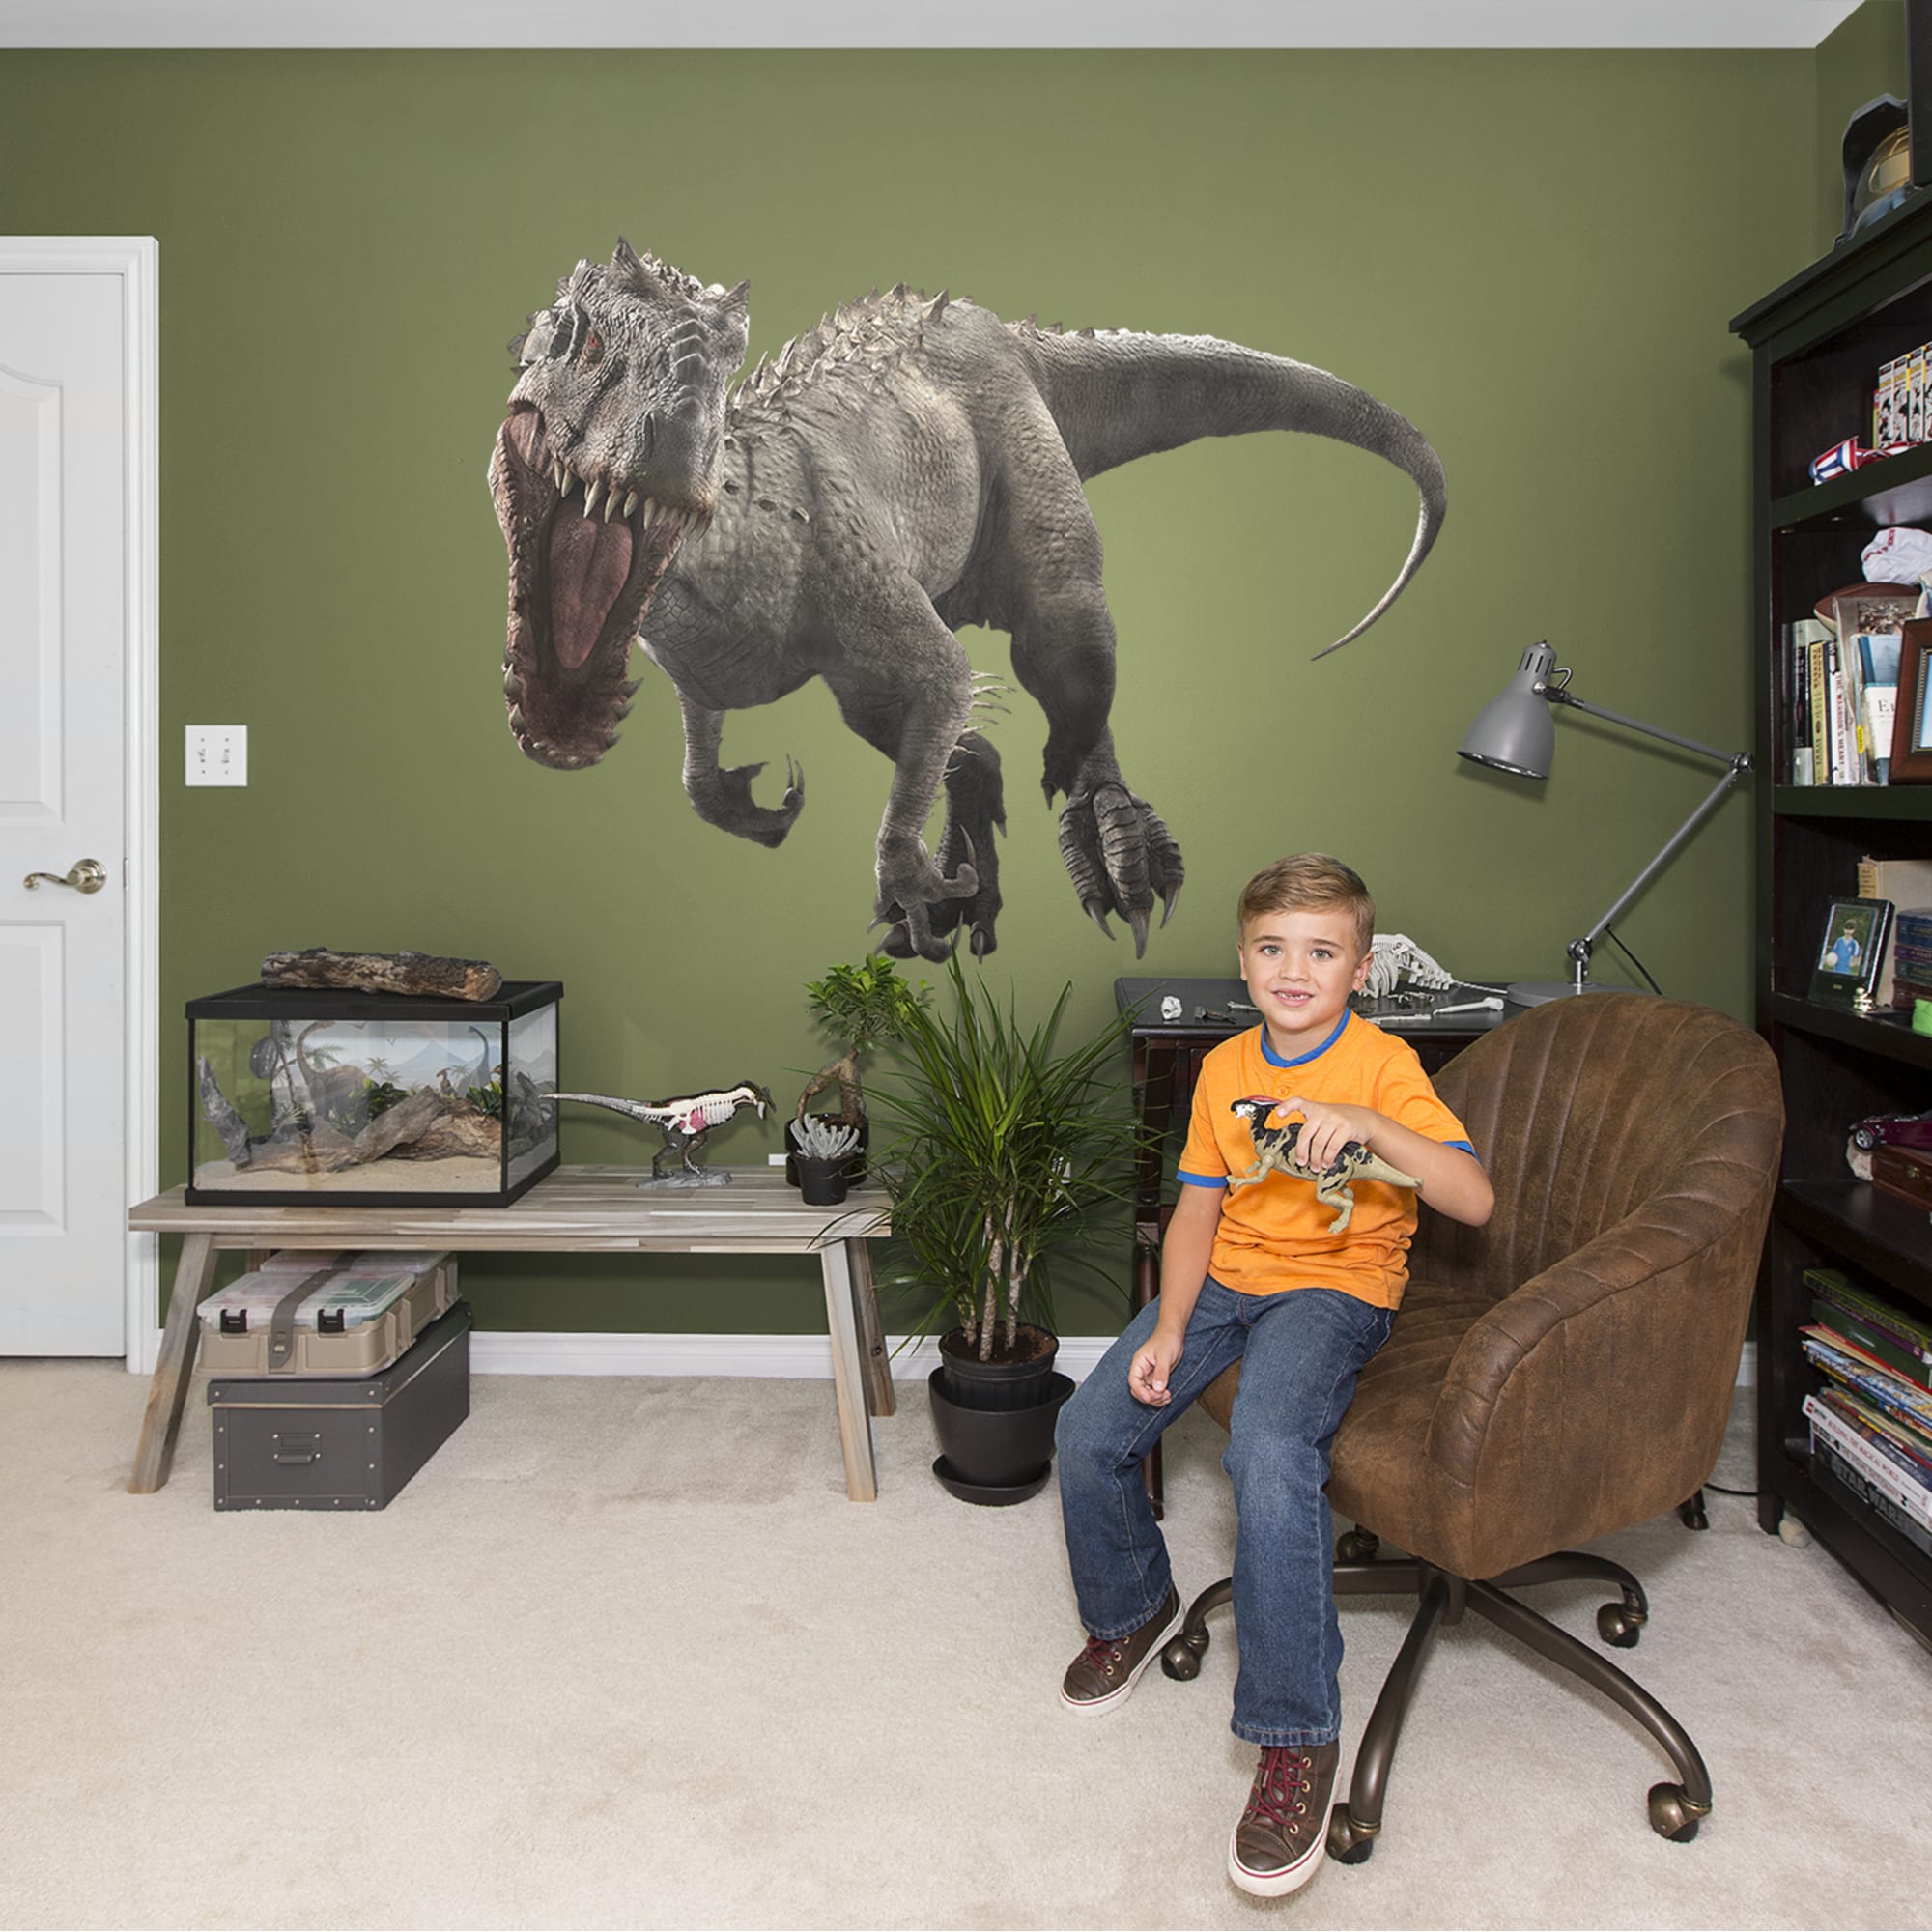 Indominus Rex: Jurassic World - Officially Licensed Removable Wall Decal 73.0"W x 55.0"H by Fathead | Vinyl